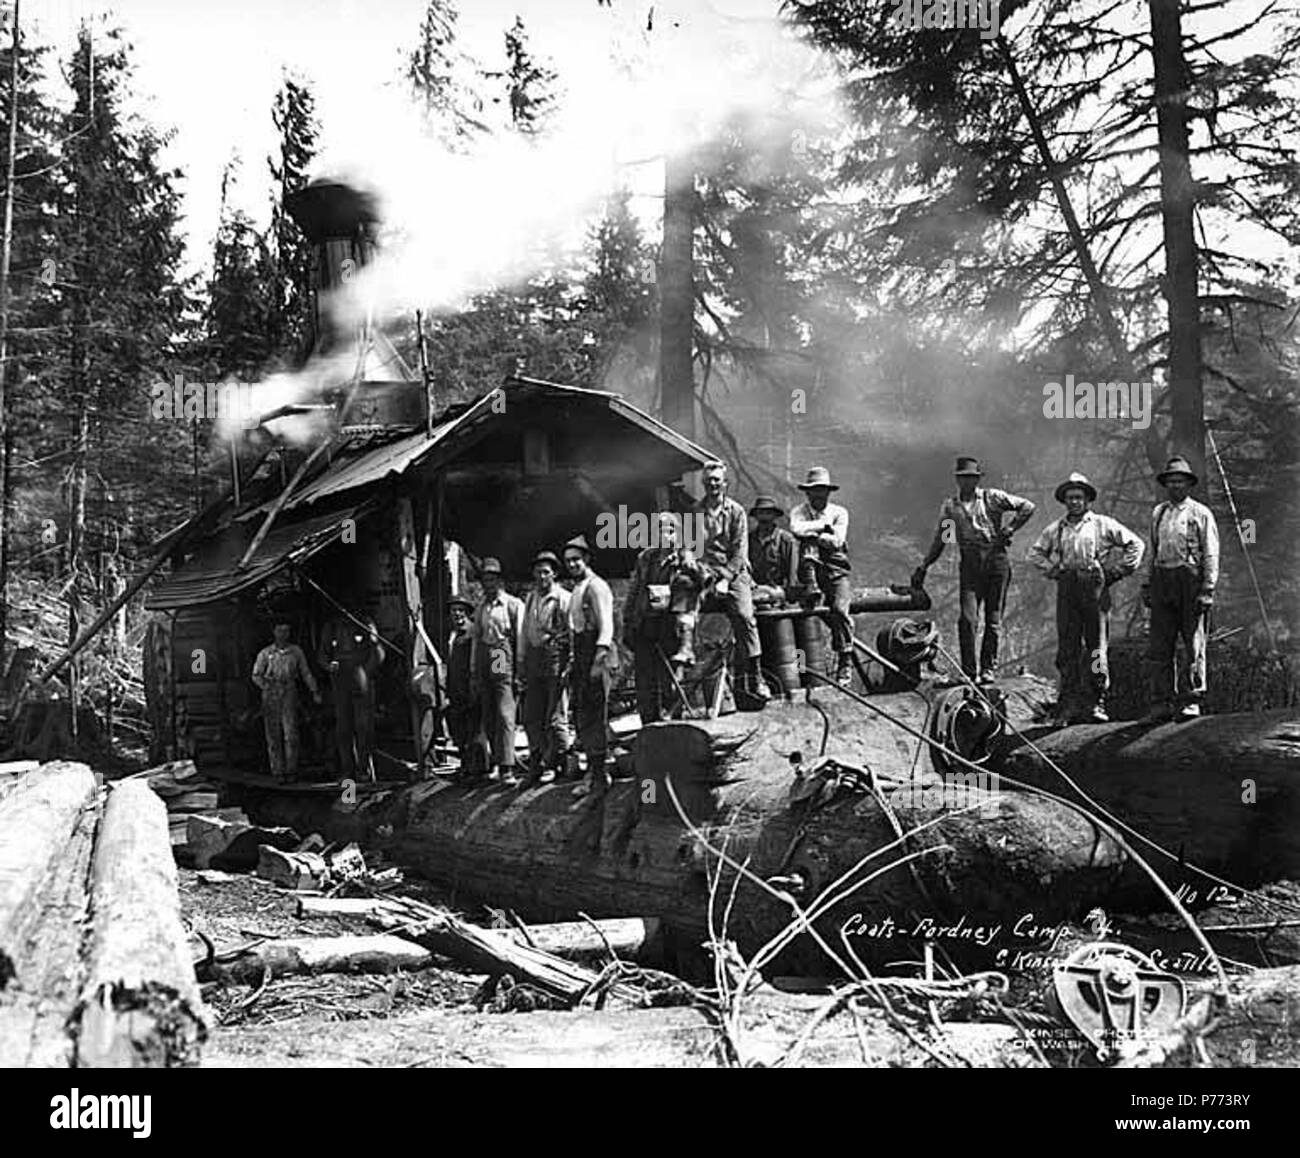 . English: Loading crew and donkey engine, camp 4, Coats-Fordney Lumber Company, near Aberdeen, ca. 1920 . English: Caption on image: Coats-Fordney, Camp #4. C. Kinsey Photo, Seattle. No. 12 PH Coll 516.626 The Coats-Fordney Lumber Company started out as the A.F. Coats Lumber Company in 1905, headquartered in Aberdeen. It became the Coats-Fordney Lumber Company in 1910, and by 1924, it was called the Donovan-Corkery Lumber Company. Aberdeen is a city in Grays Harbor (formerly called Chehalis) County. The town was platted by Samuel Benn in 1884 on his homestead. Benn was born in New York City a Stock Photo